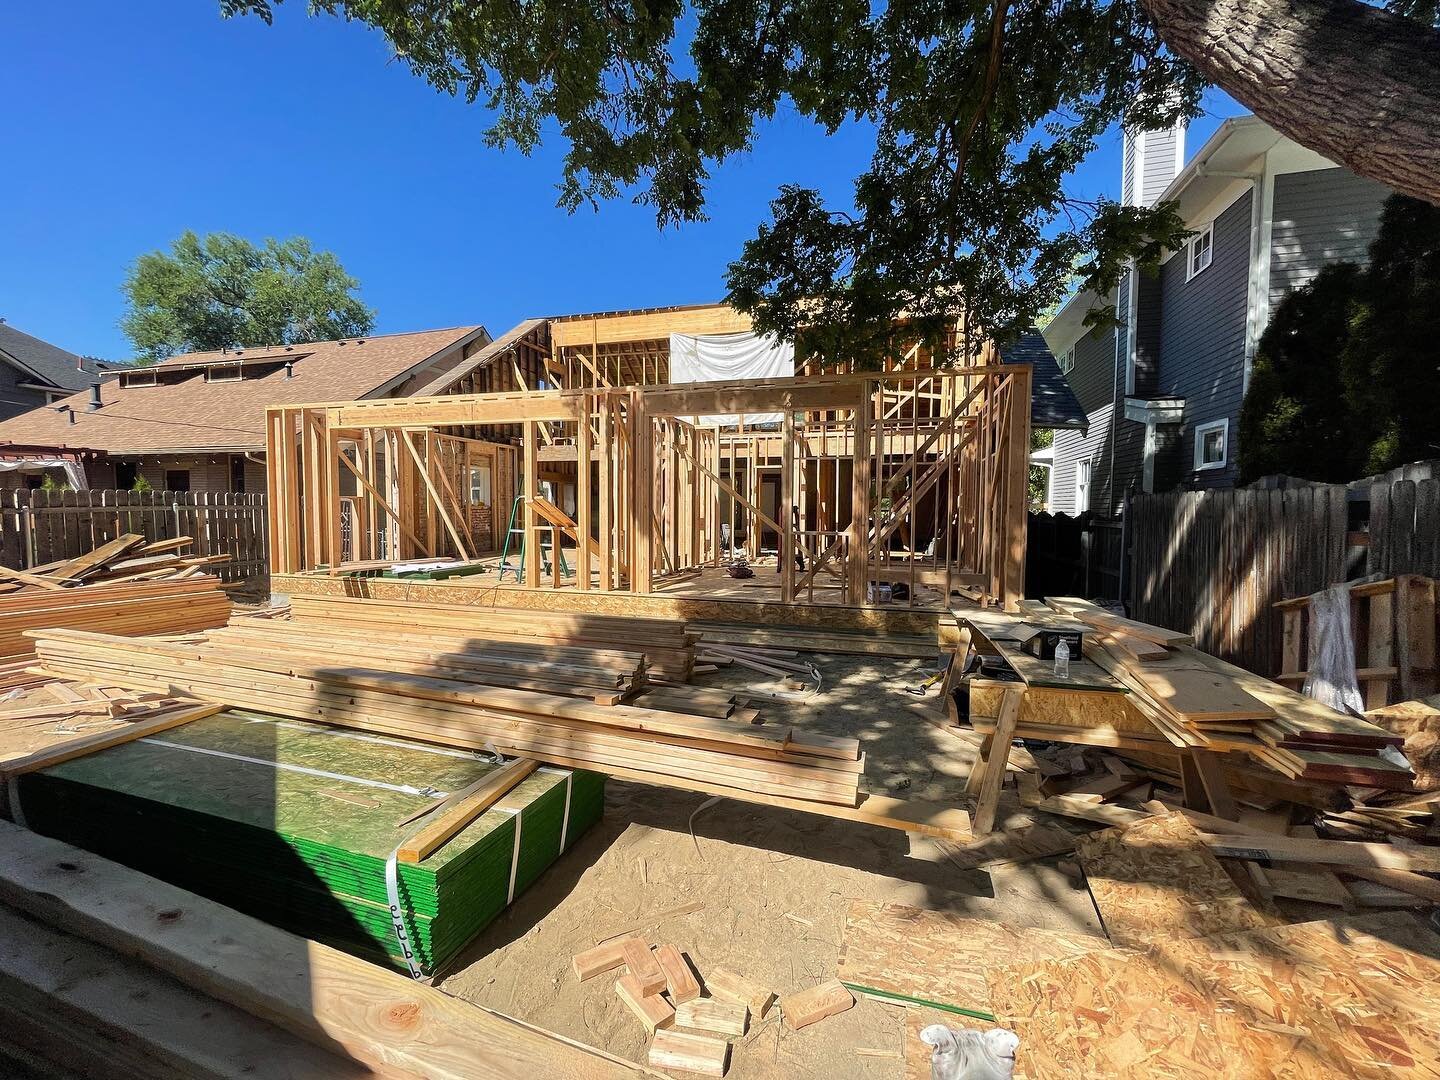 Et viol&agrave;, we have walls!! 

This beautiful historic home is starting to really take shape!

#remodel #framing #historic #northendboise #thisisboise #websterconstruction